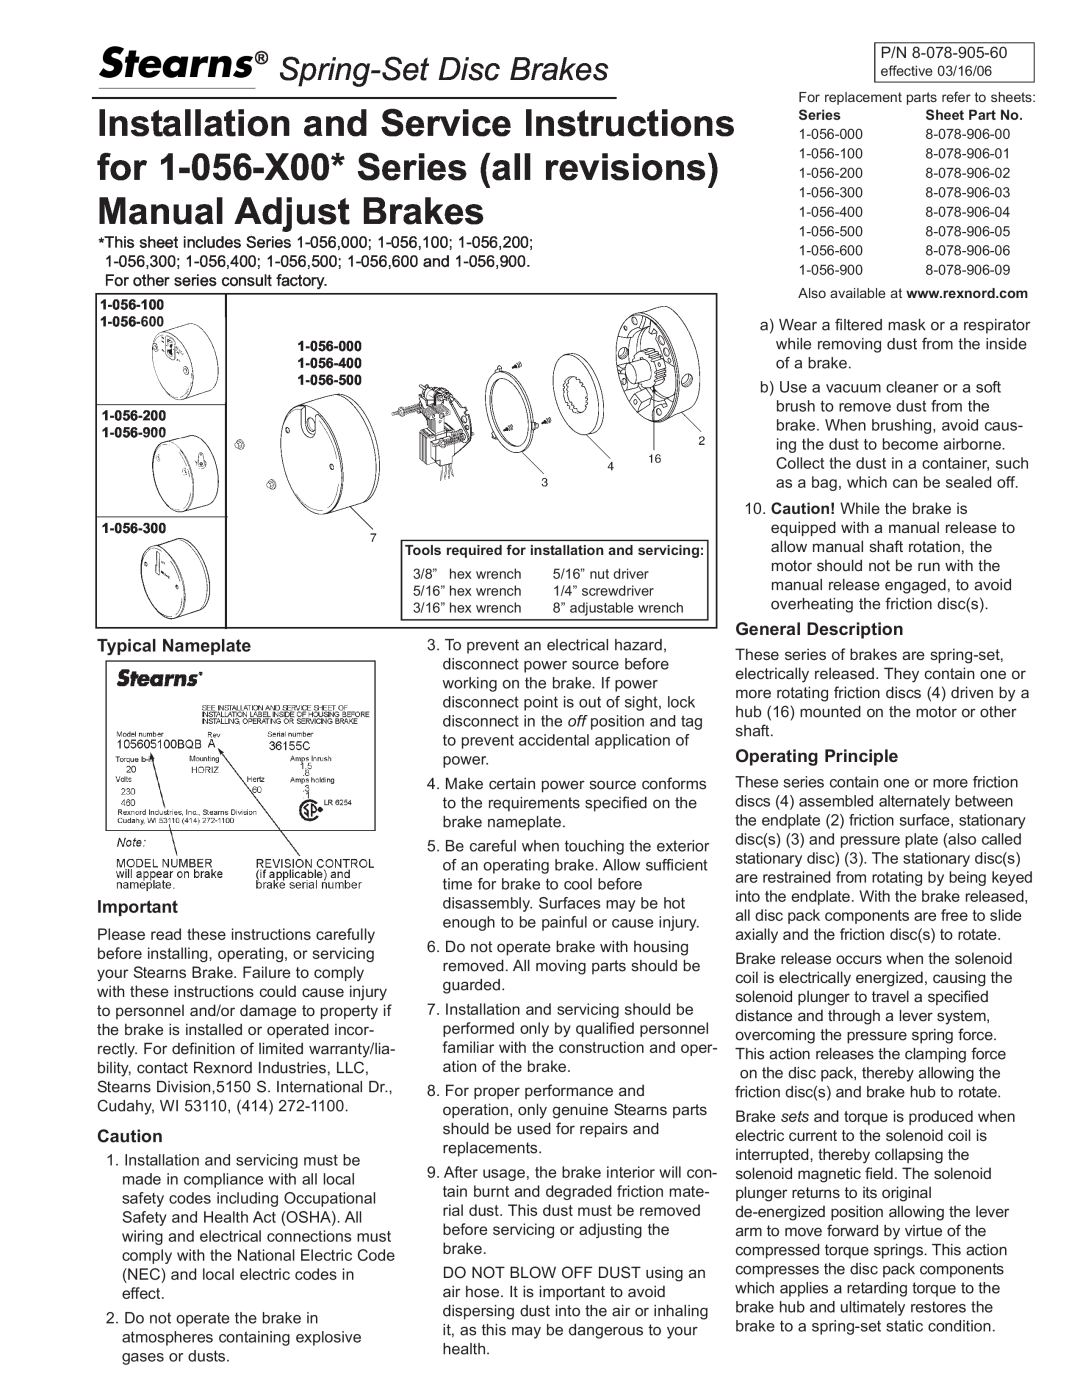 Stearns manual General Description, Typical Nameplate, Operating Principle, for 1-056-X00* Series all revisions 